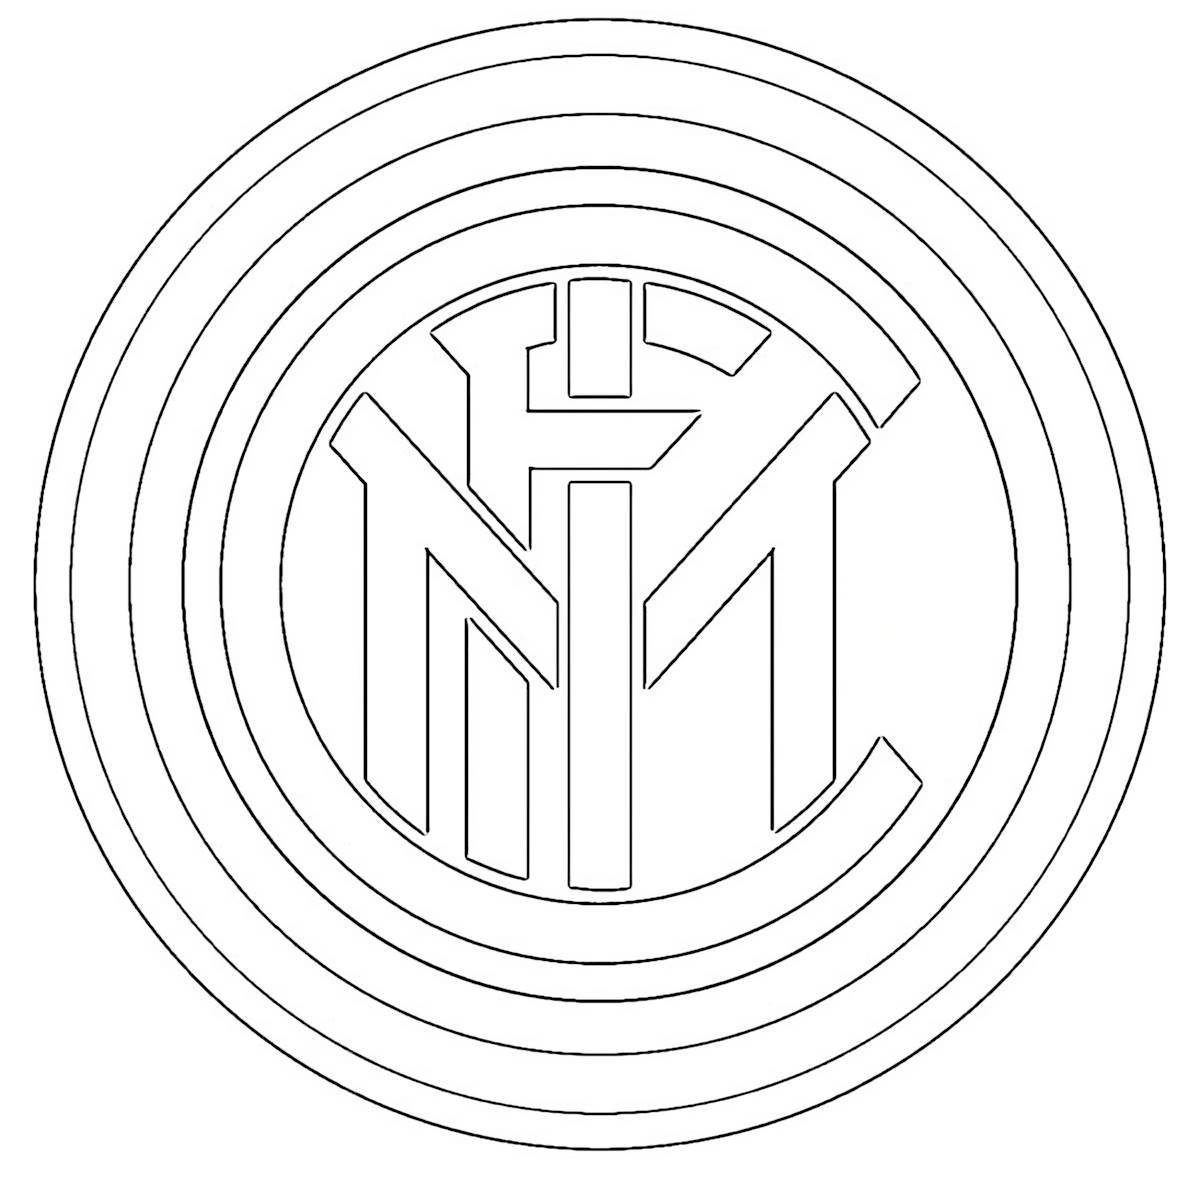 Inter Milan shield coloring page to print and color